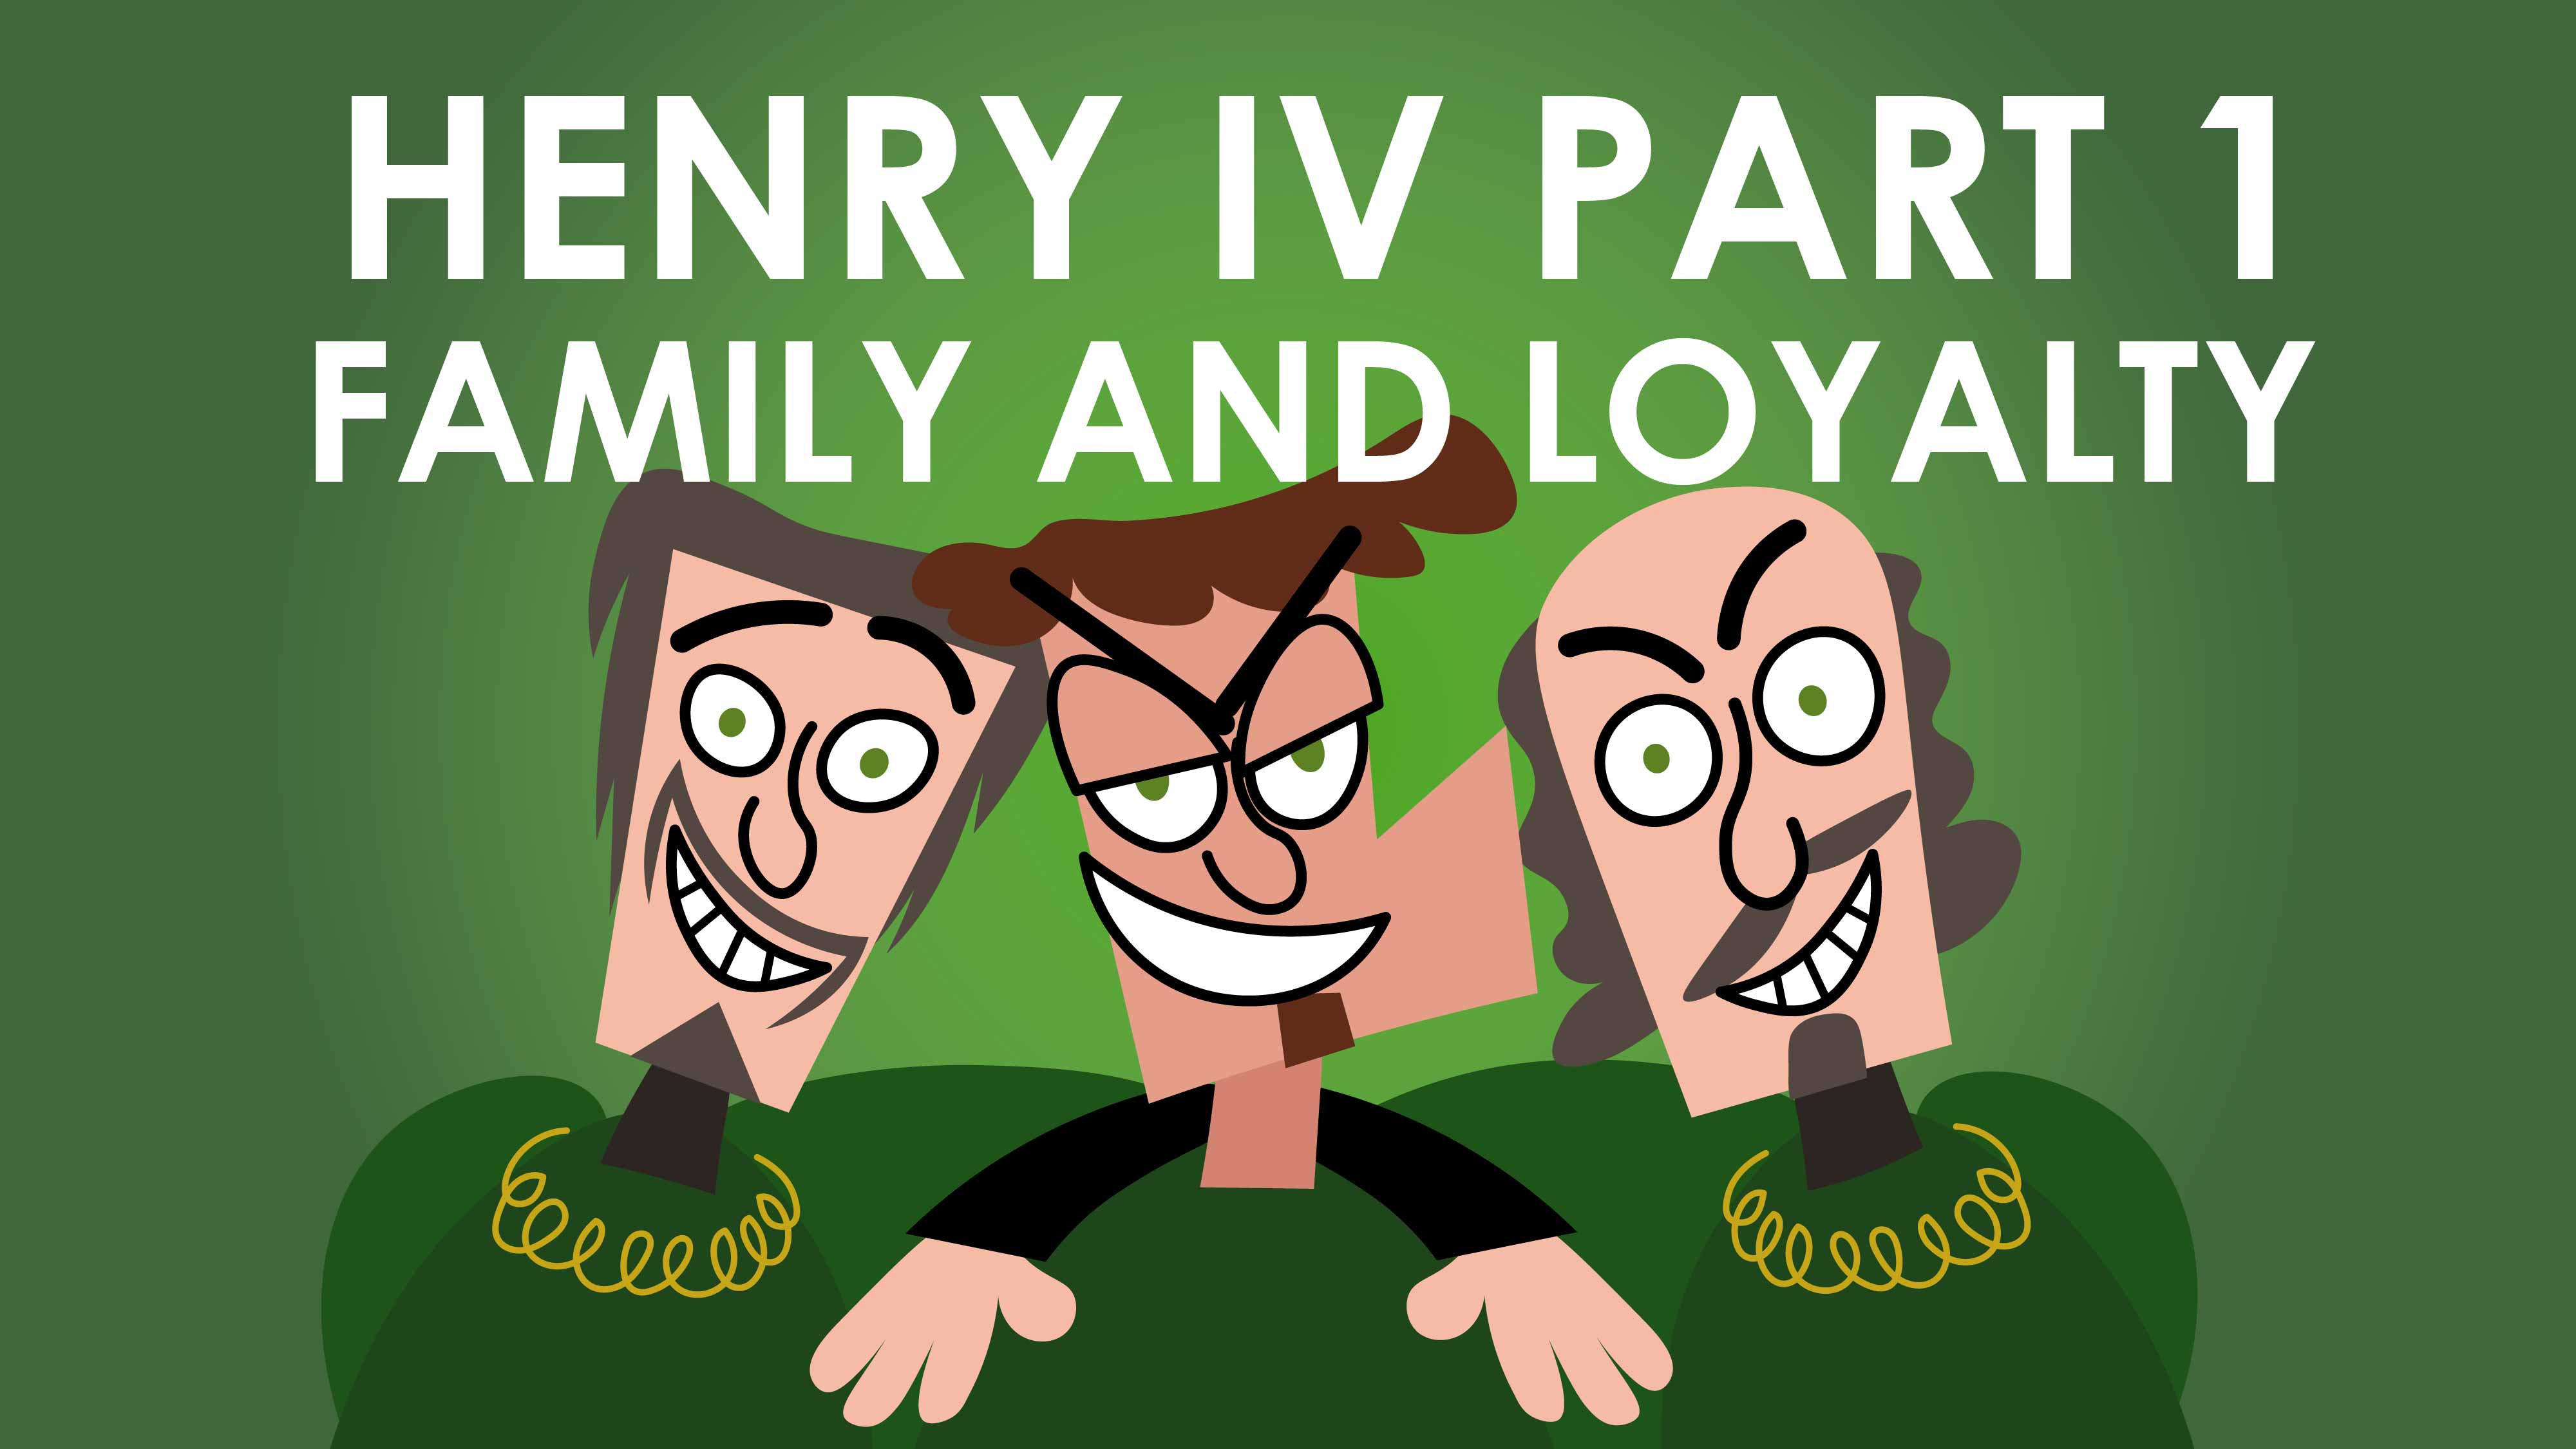 Henry IV Part 1 Theme of Family and Loyalty - Shakespeare Today Series